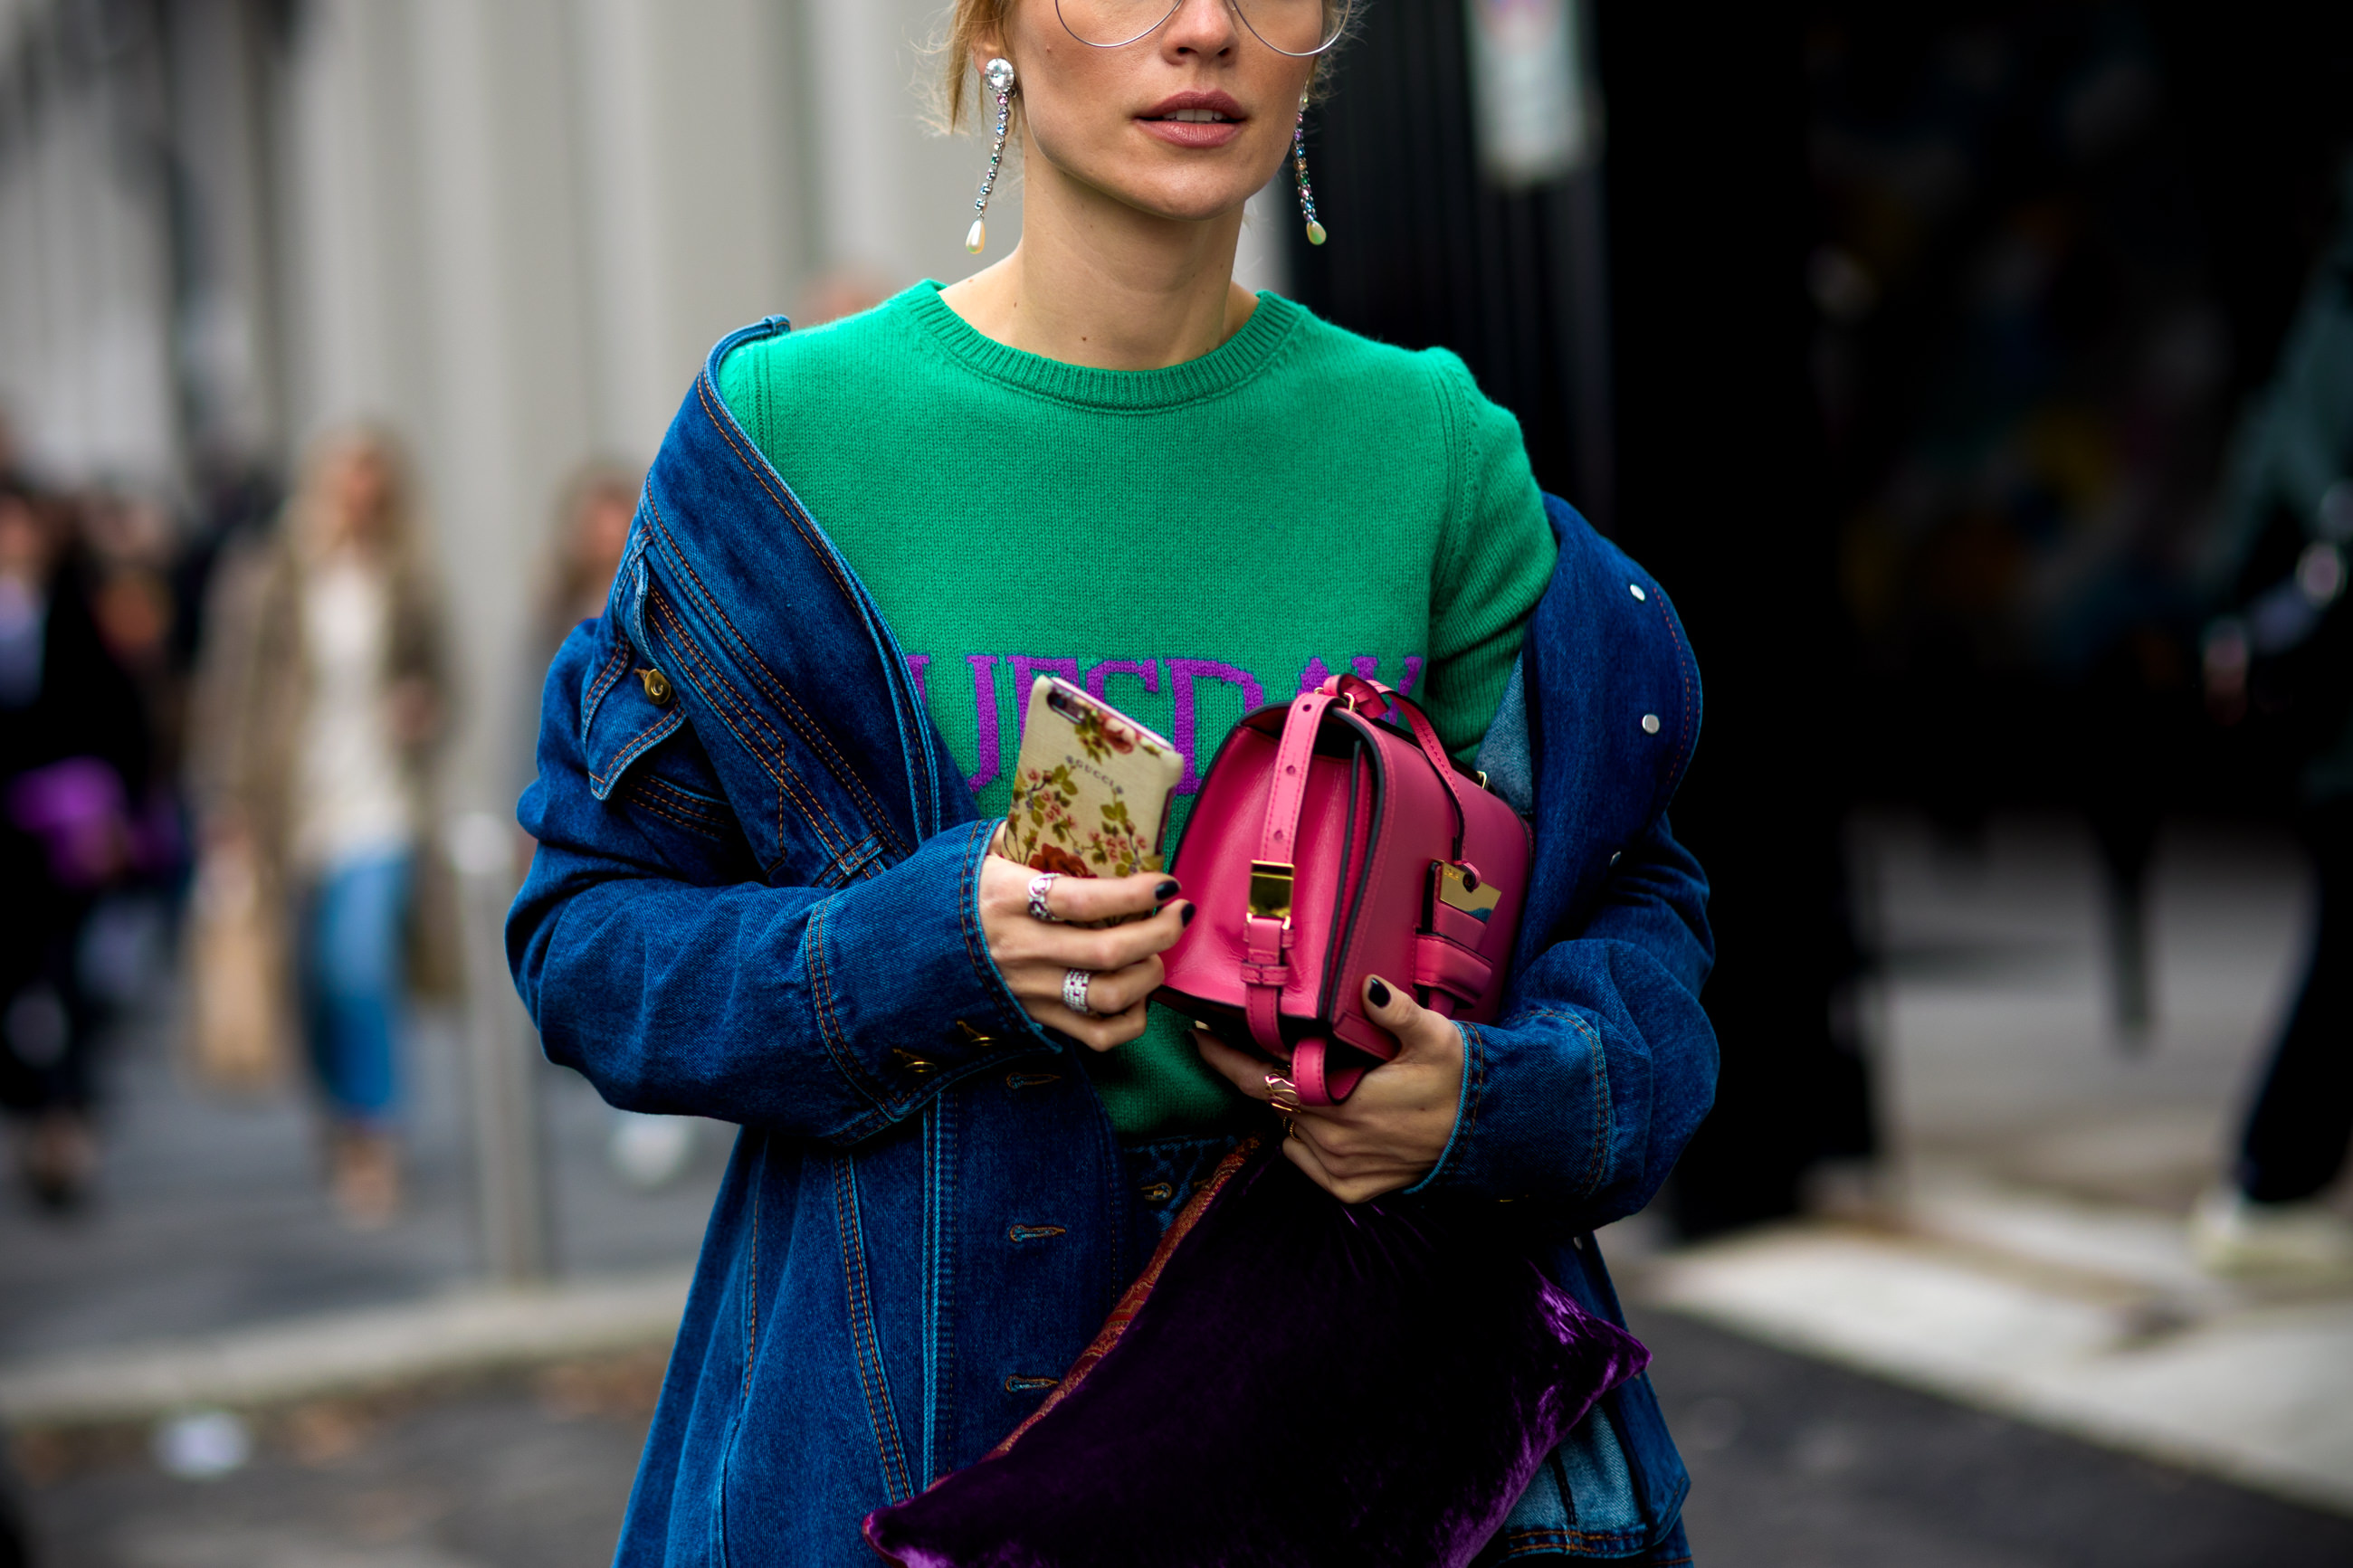 MFW FW17 Street Style: Viktoria Rader wearing a denin jacket by Ellery, Alberta Ferretti sweater and Loewe bag after a fashion show in Milan, Italy